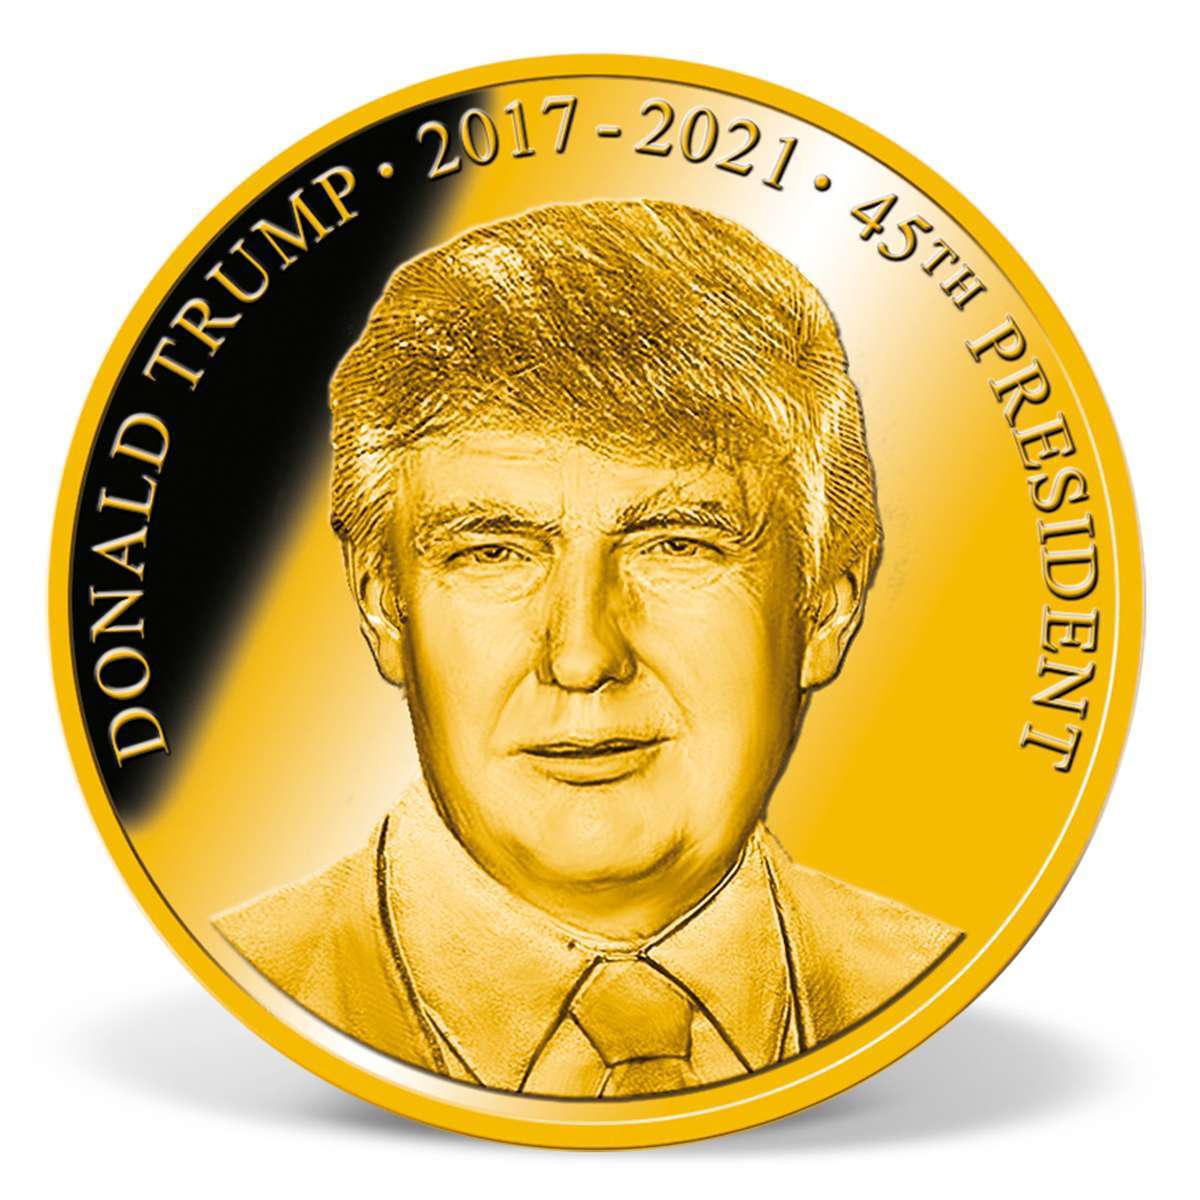 President Donald Trump Commemorative Coin | Gold-Layered | Gold | American Mint